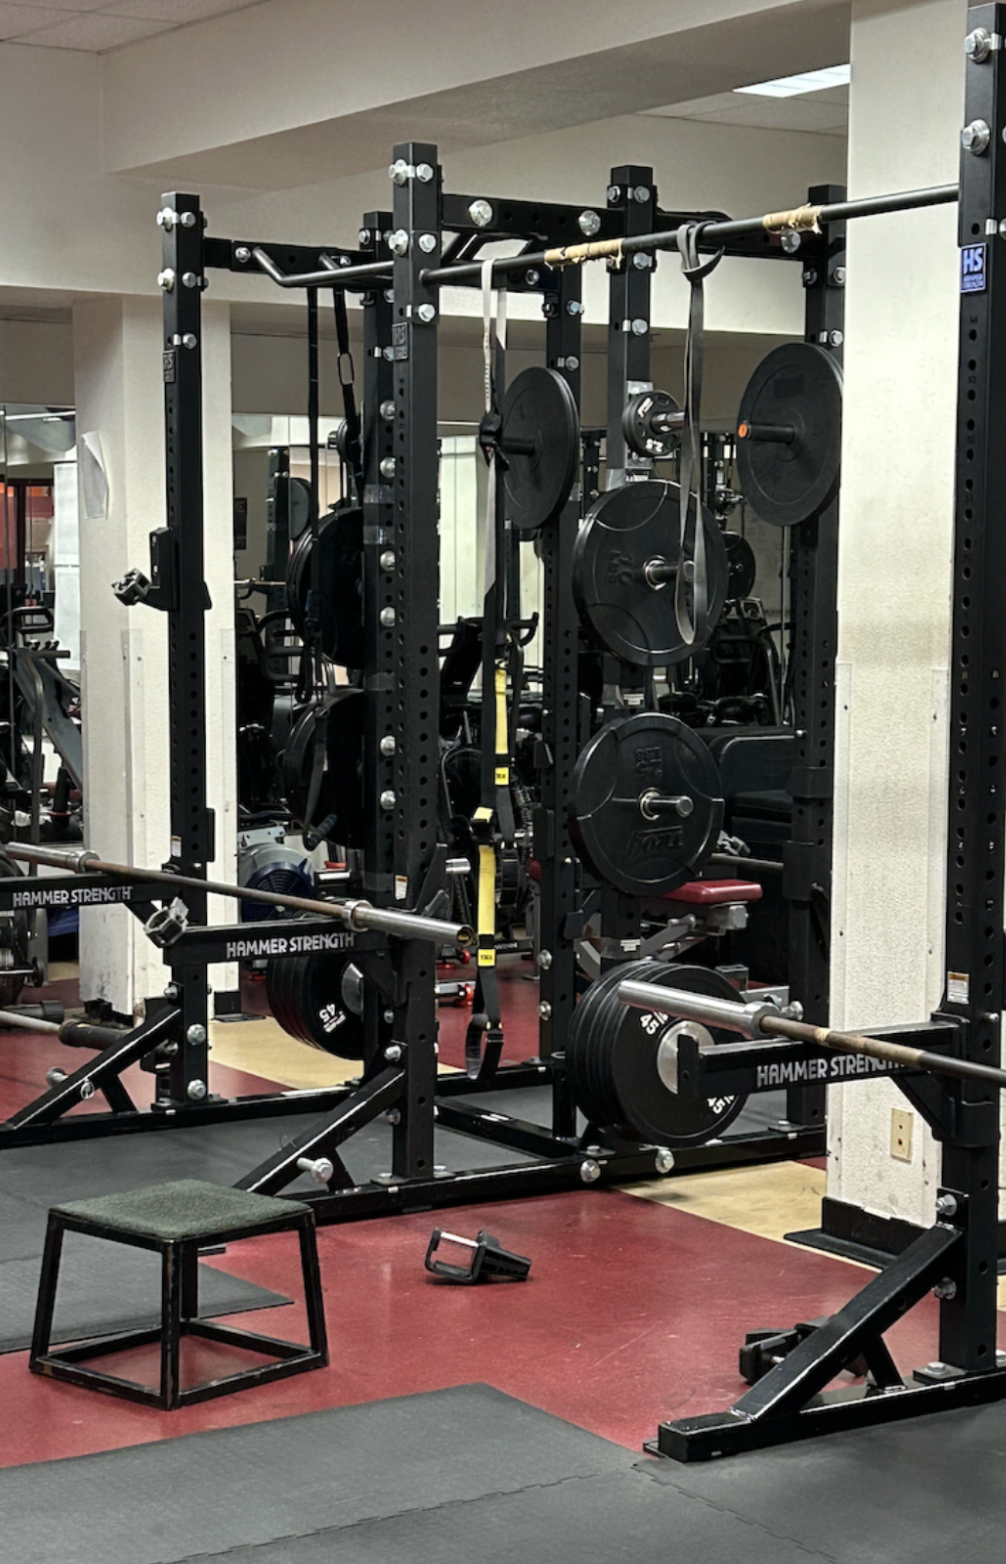 Located under the Eva May Fleet Athletics Center, the Bishop’s weight room is filled with different kinds of equipment such as barbells, resistance bands, and treadmills.